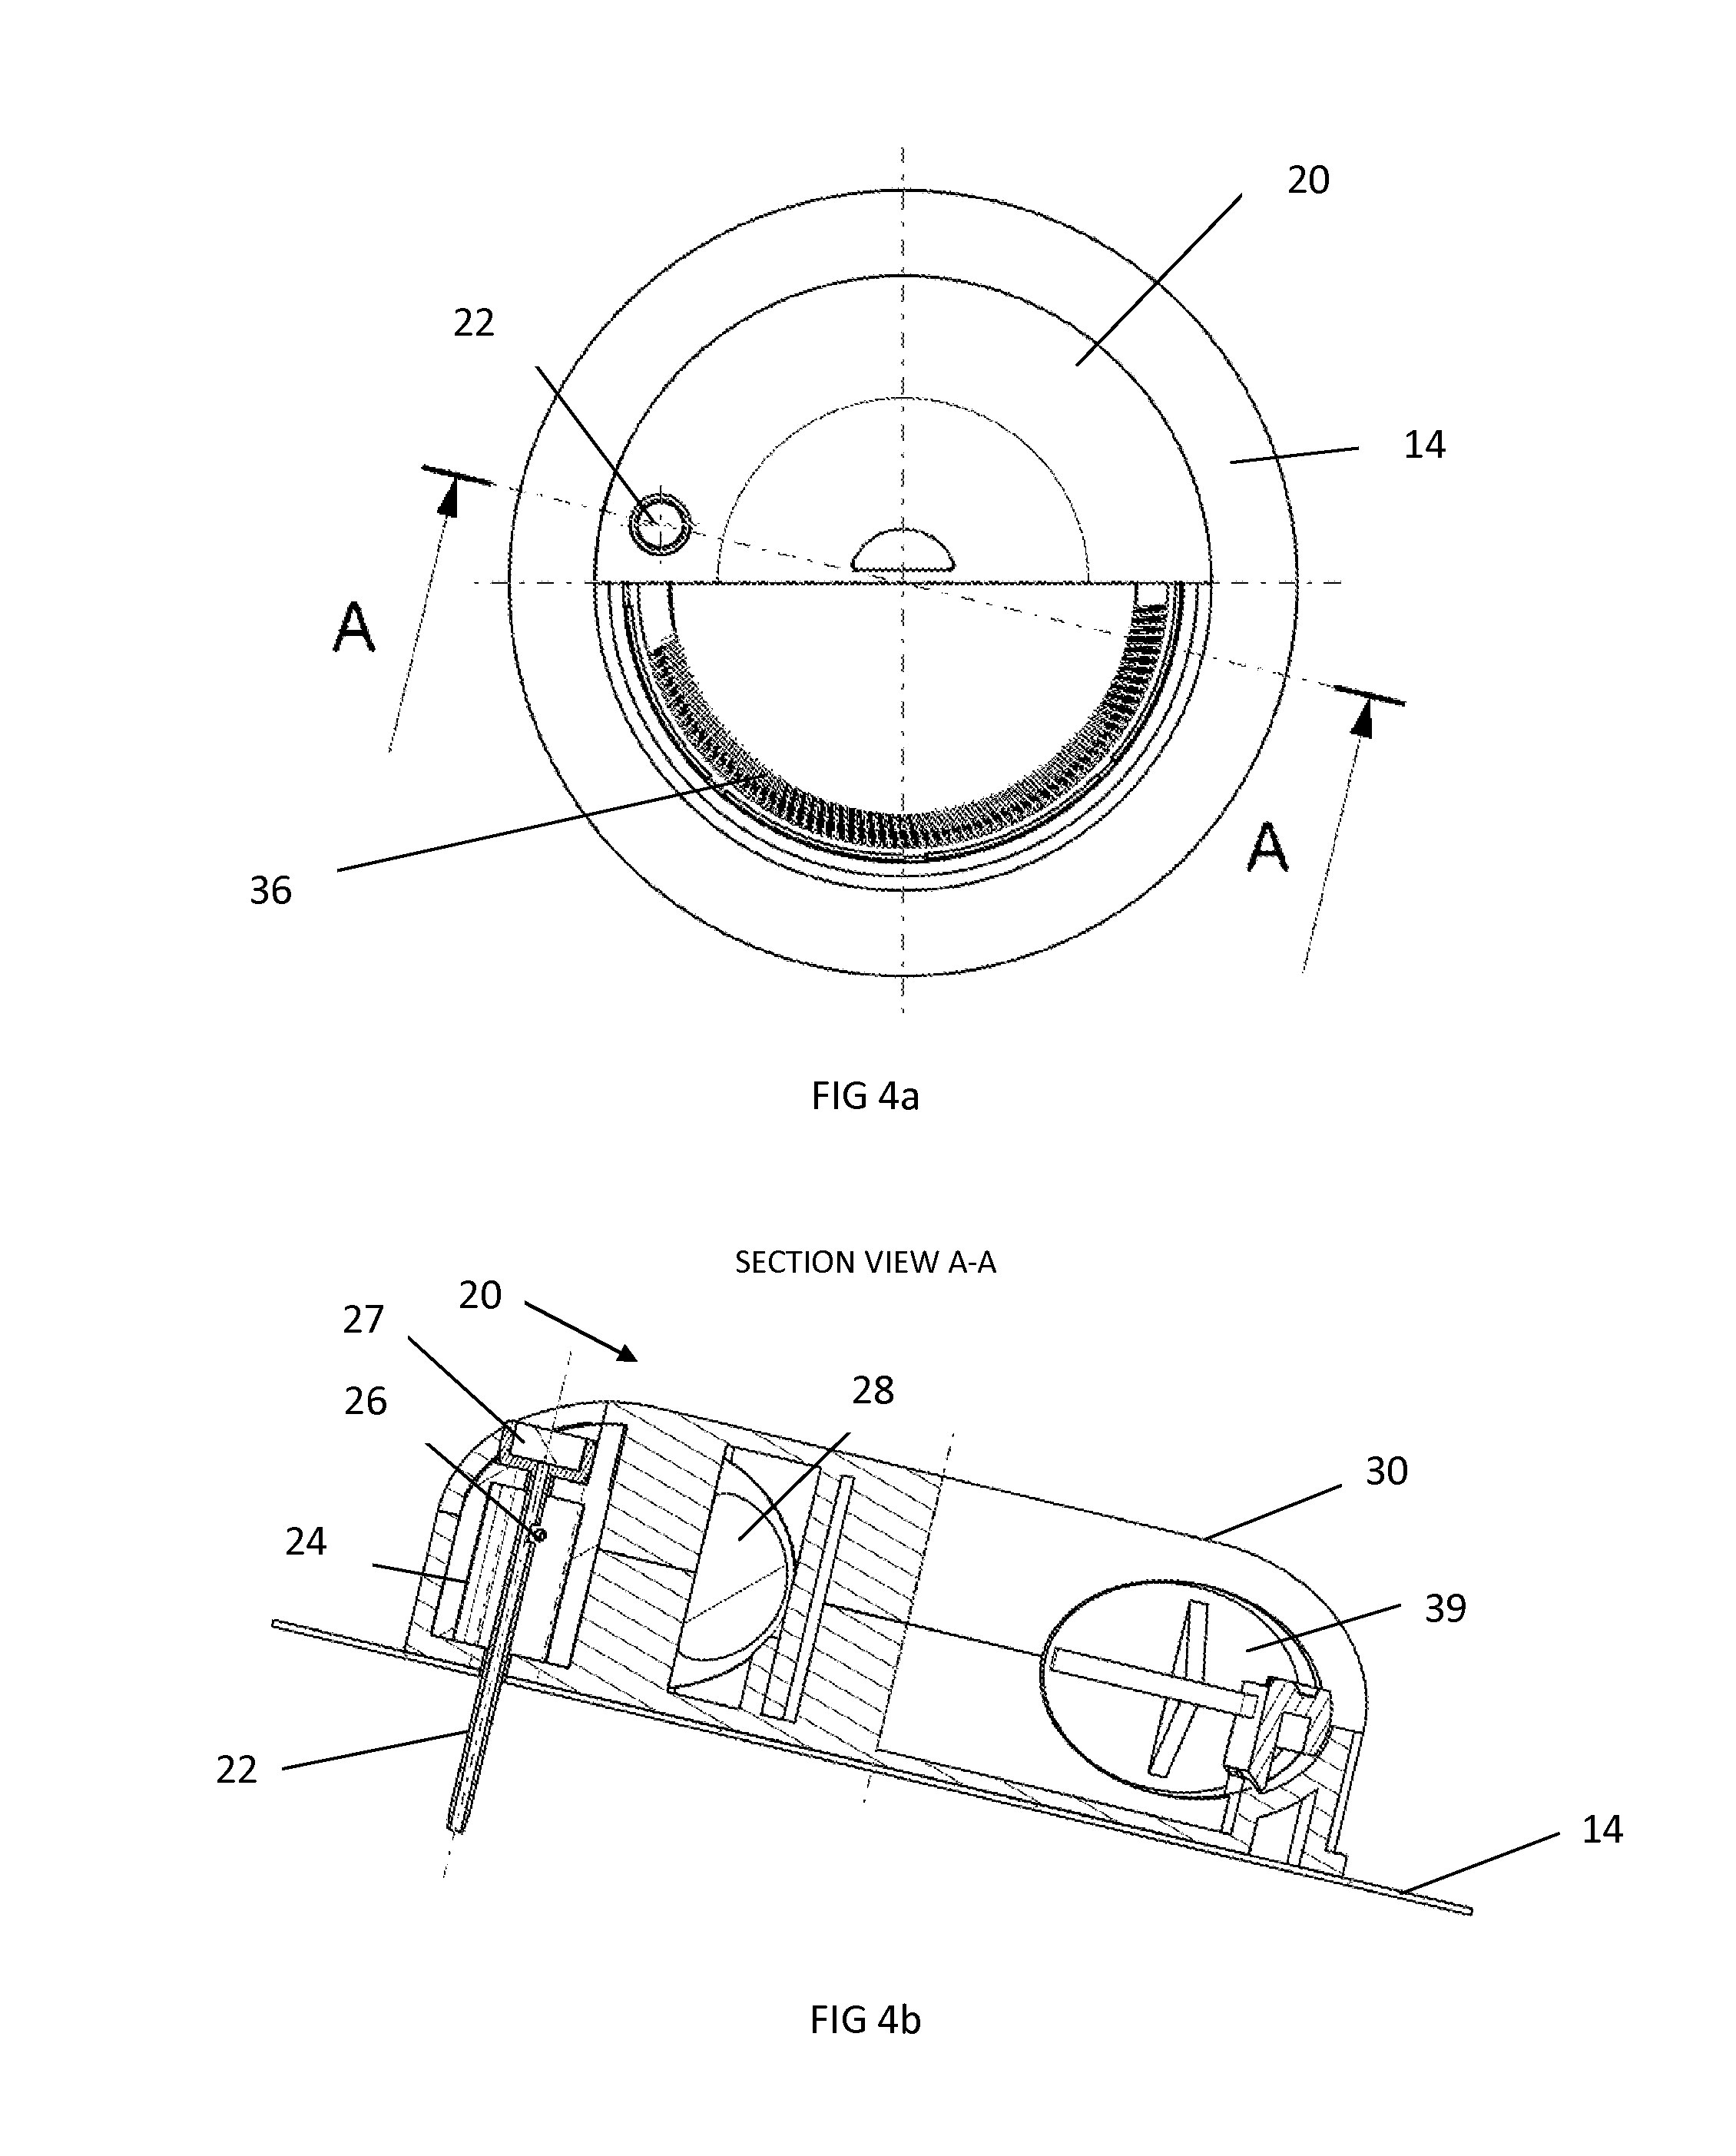 Fluid delivery system and methods